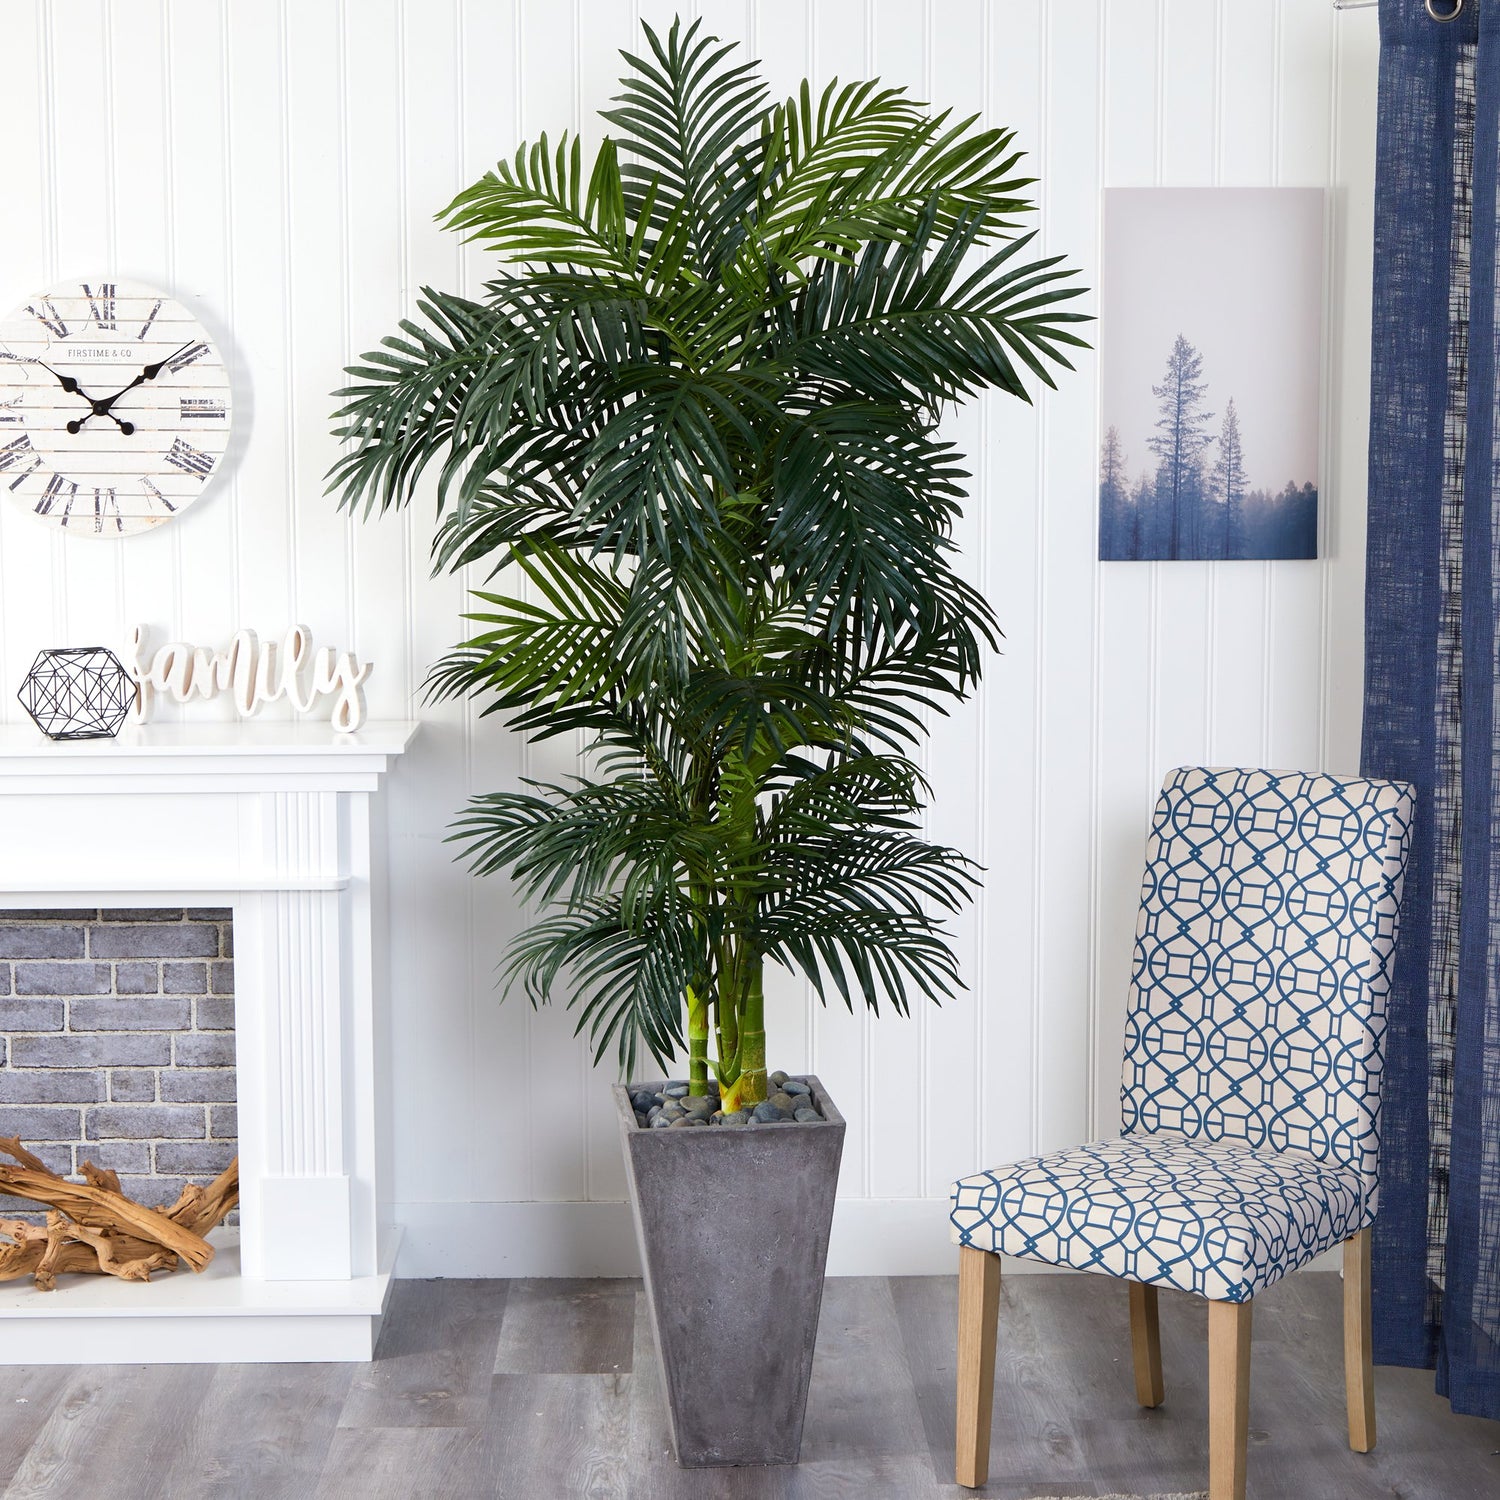 7’ Golden Cane Artificial Palm Tree in Cement Planter